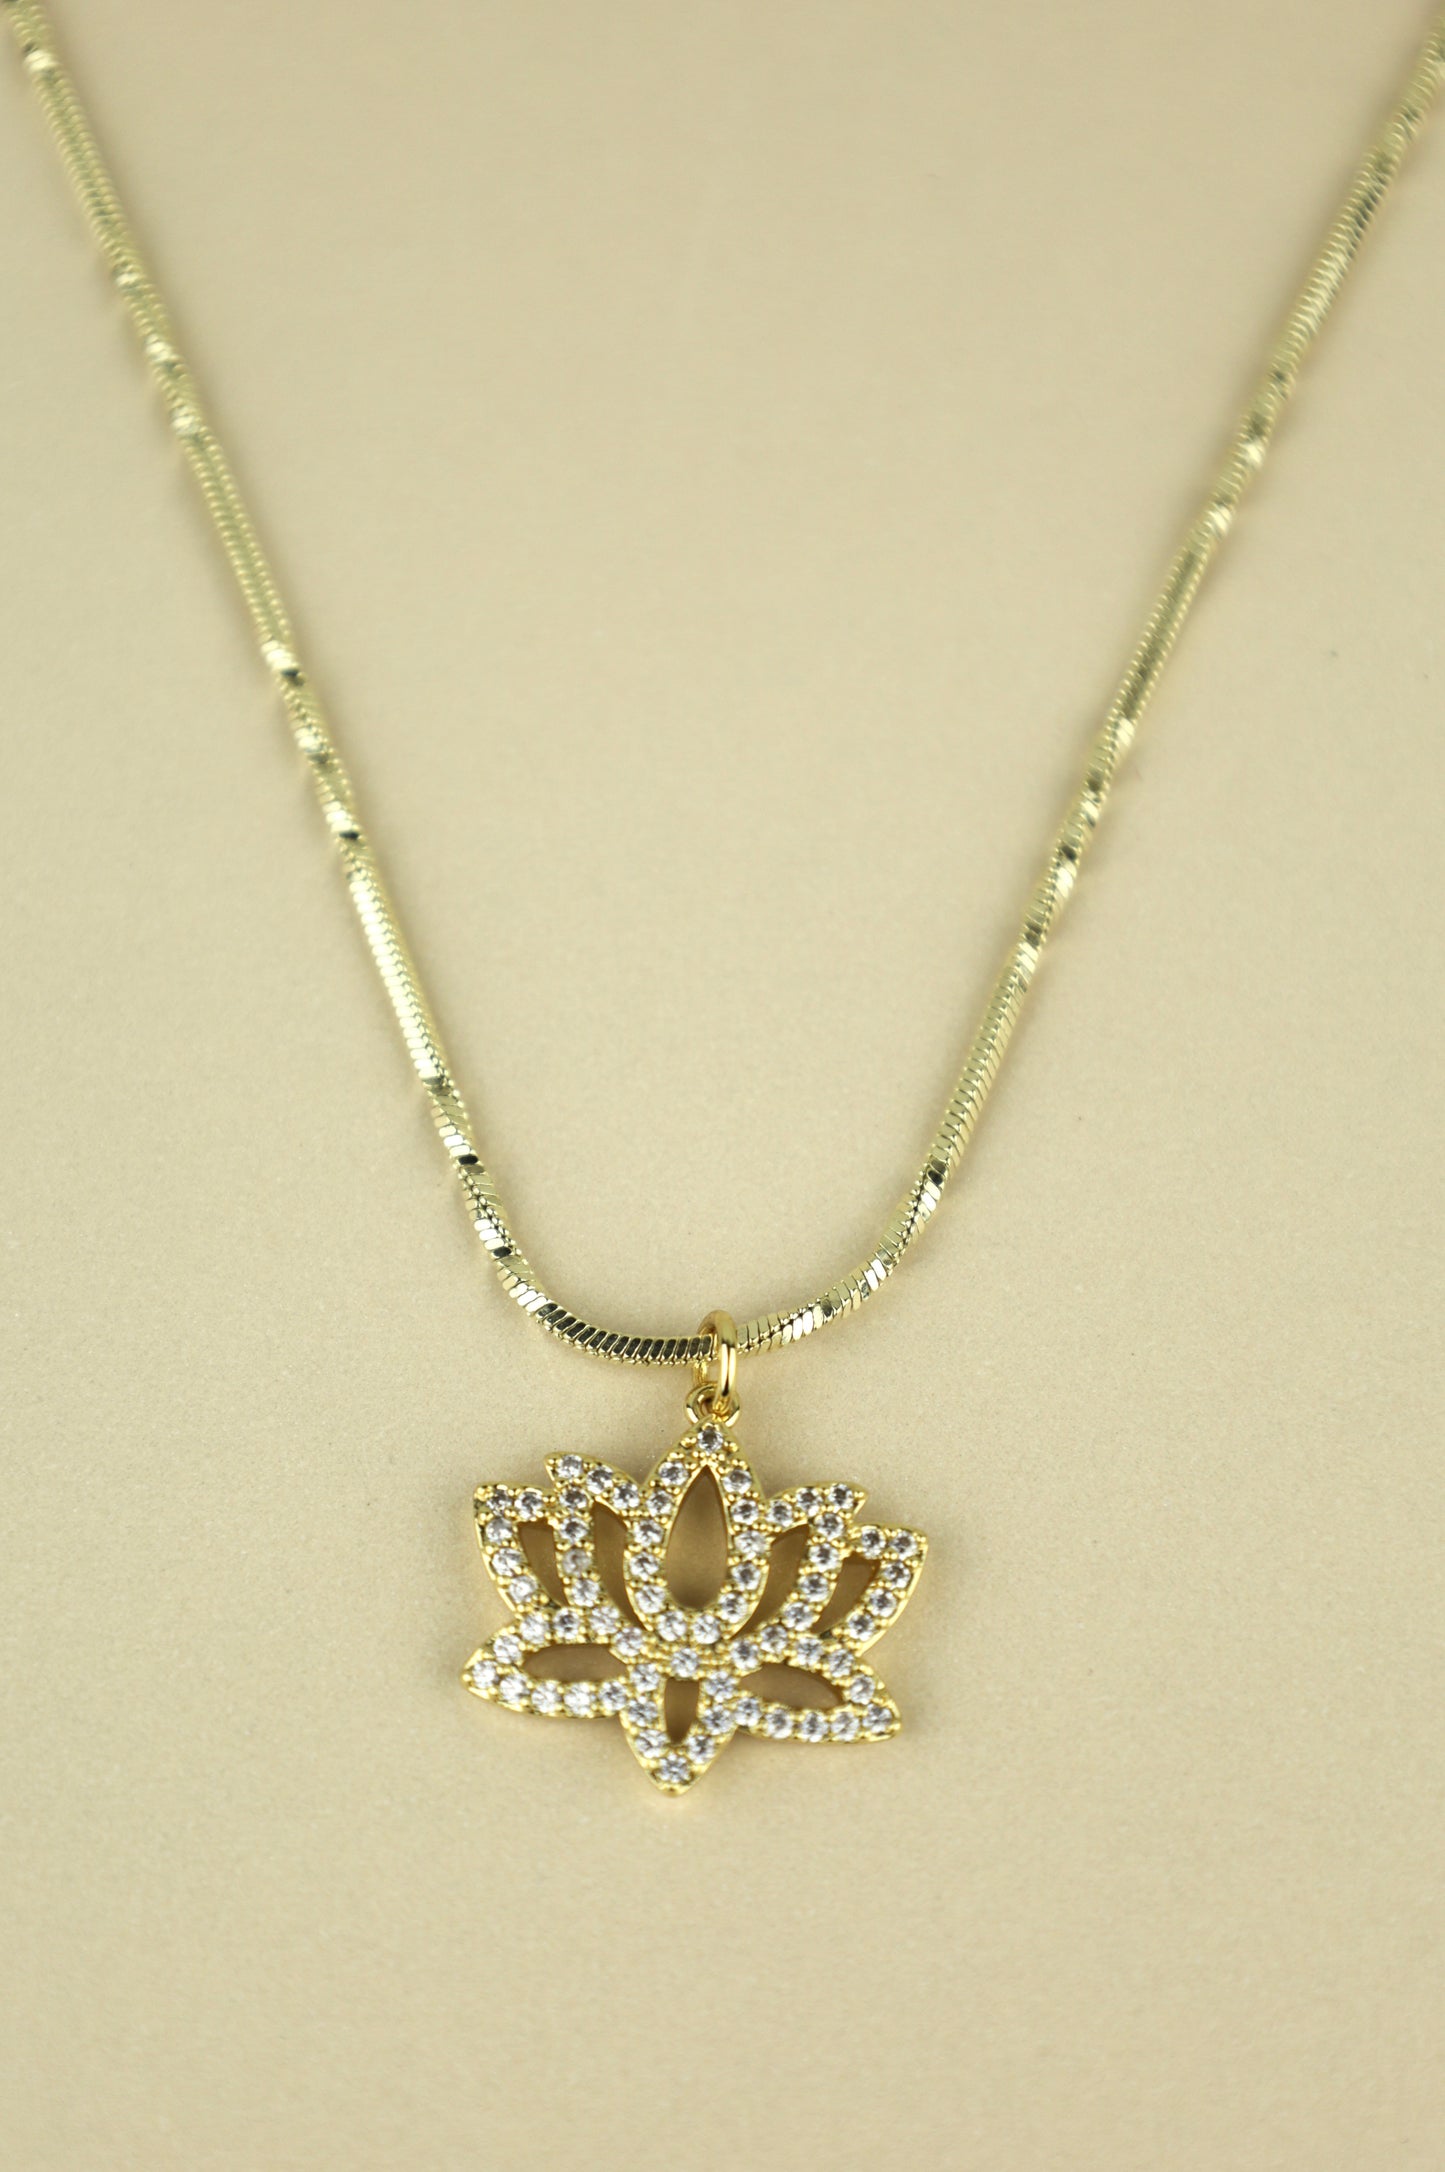 Lotus necklace in gold